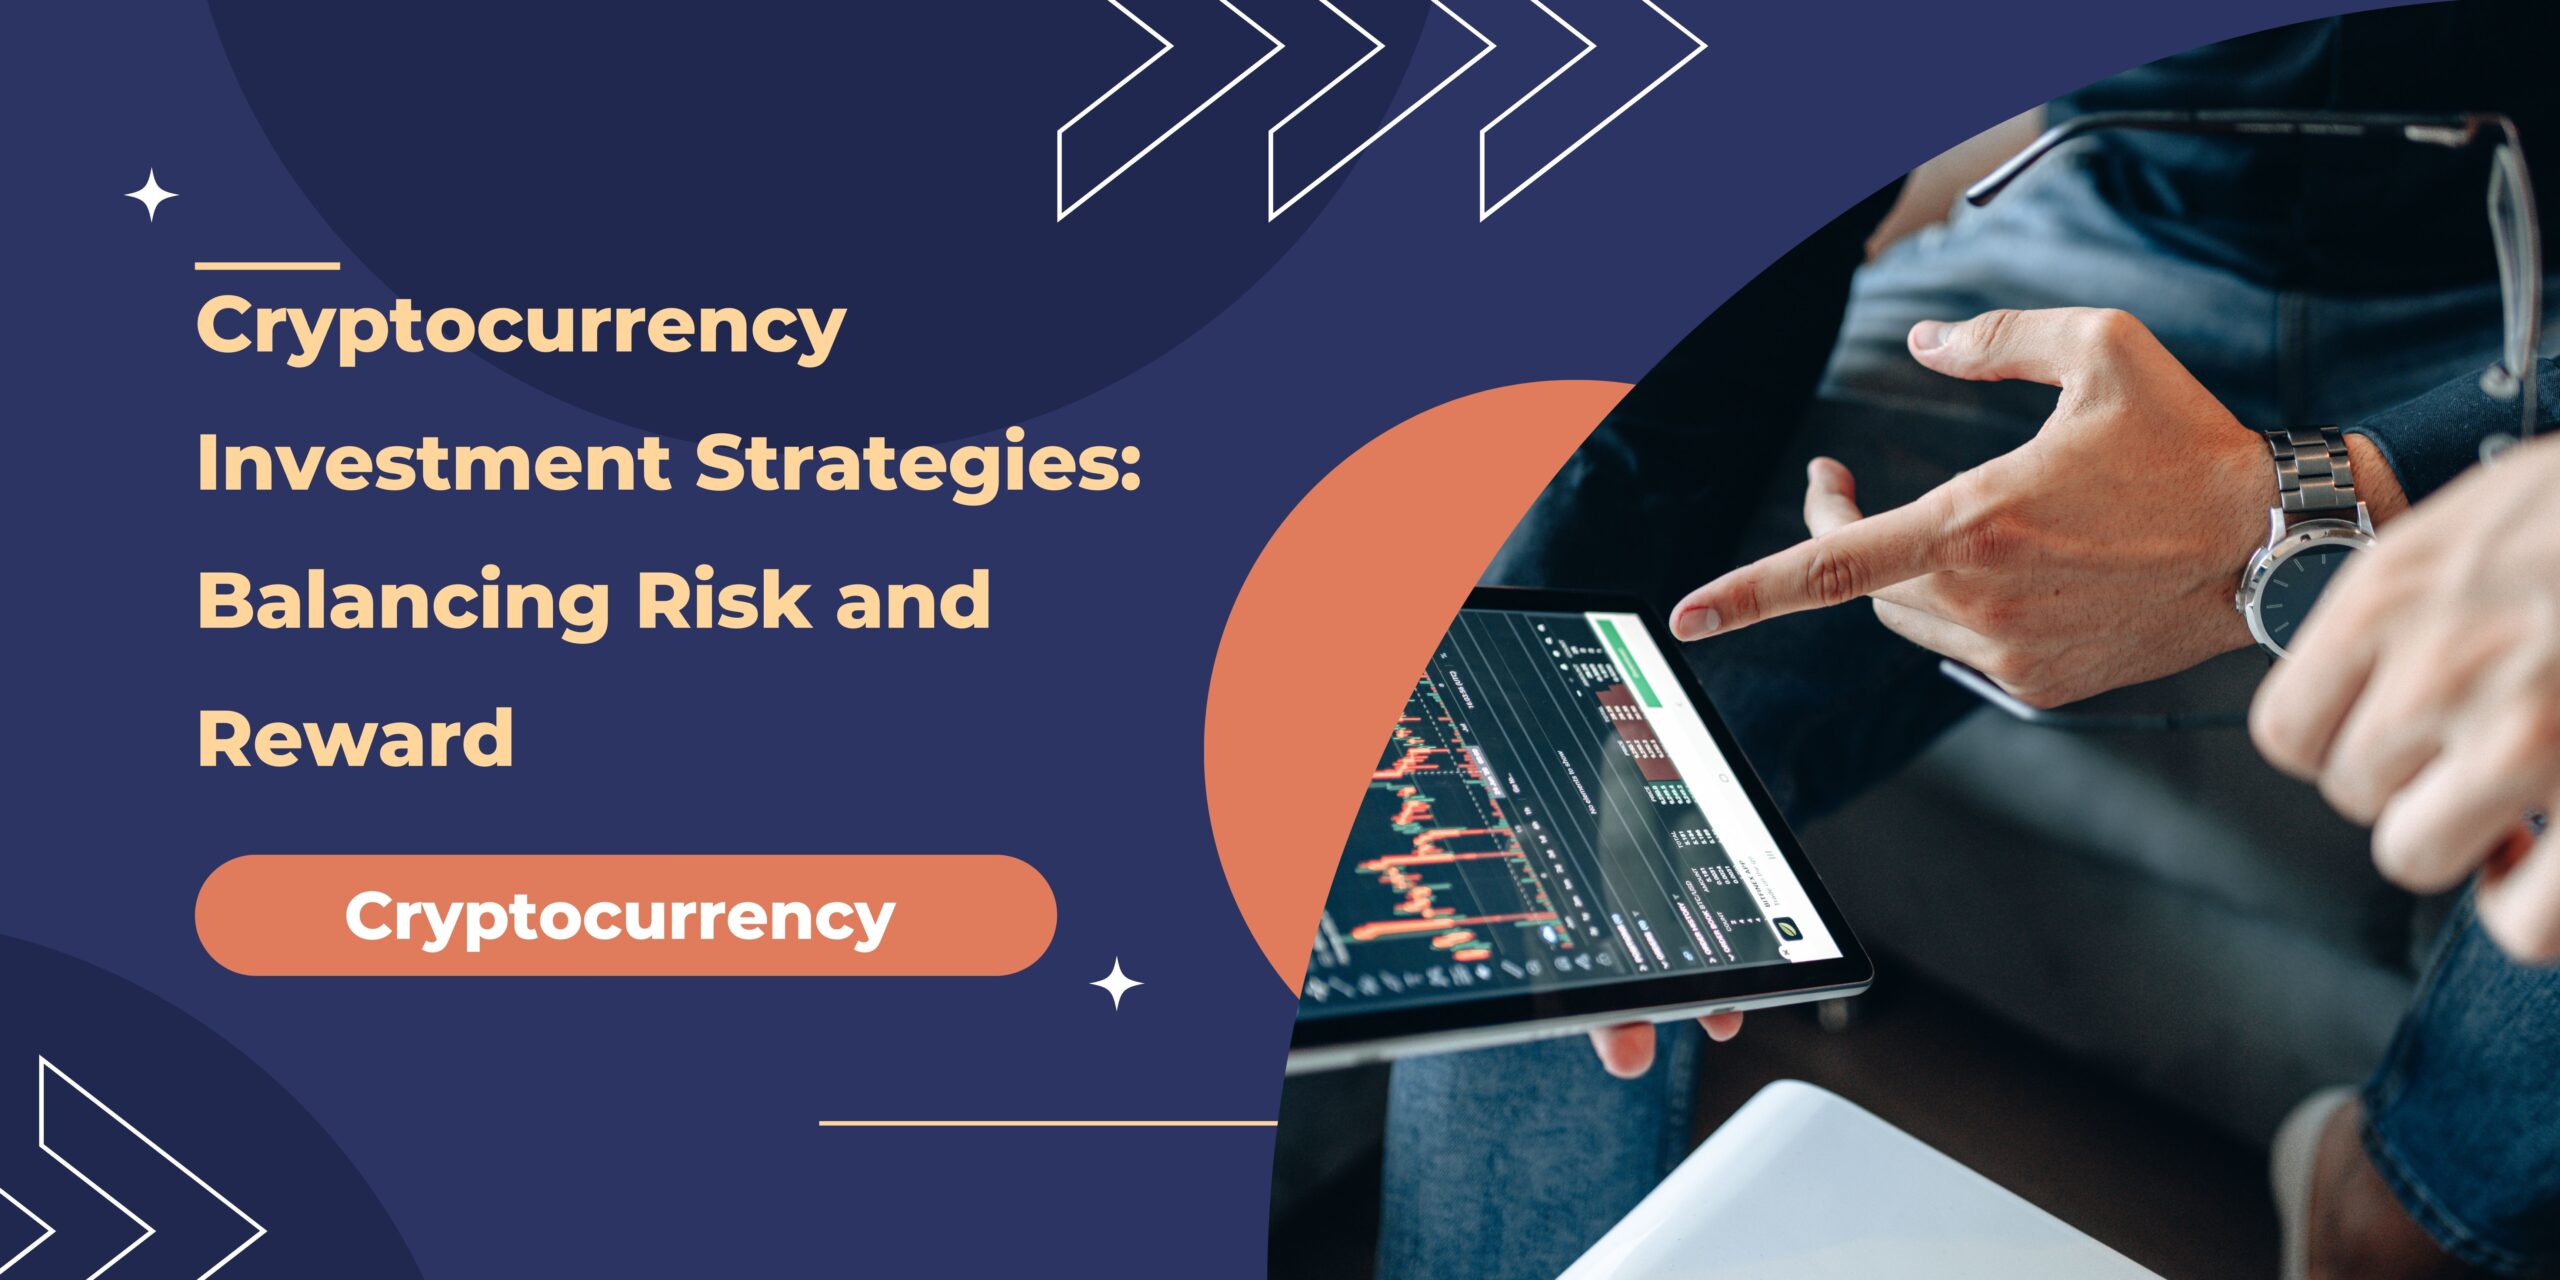 Cryptocurrency Investment Strategies: Balancing Risk and Reward